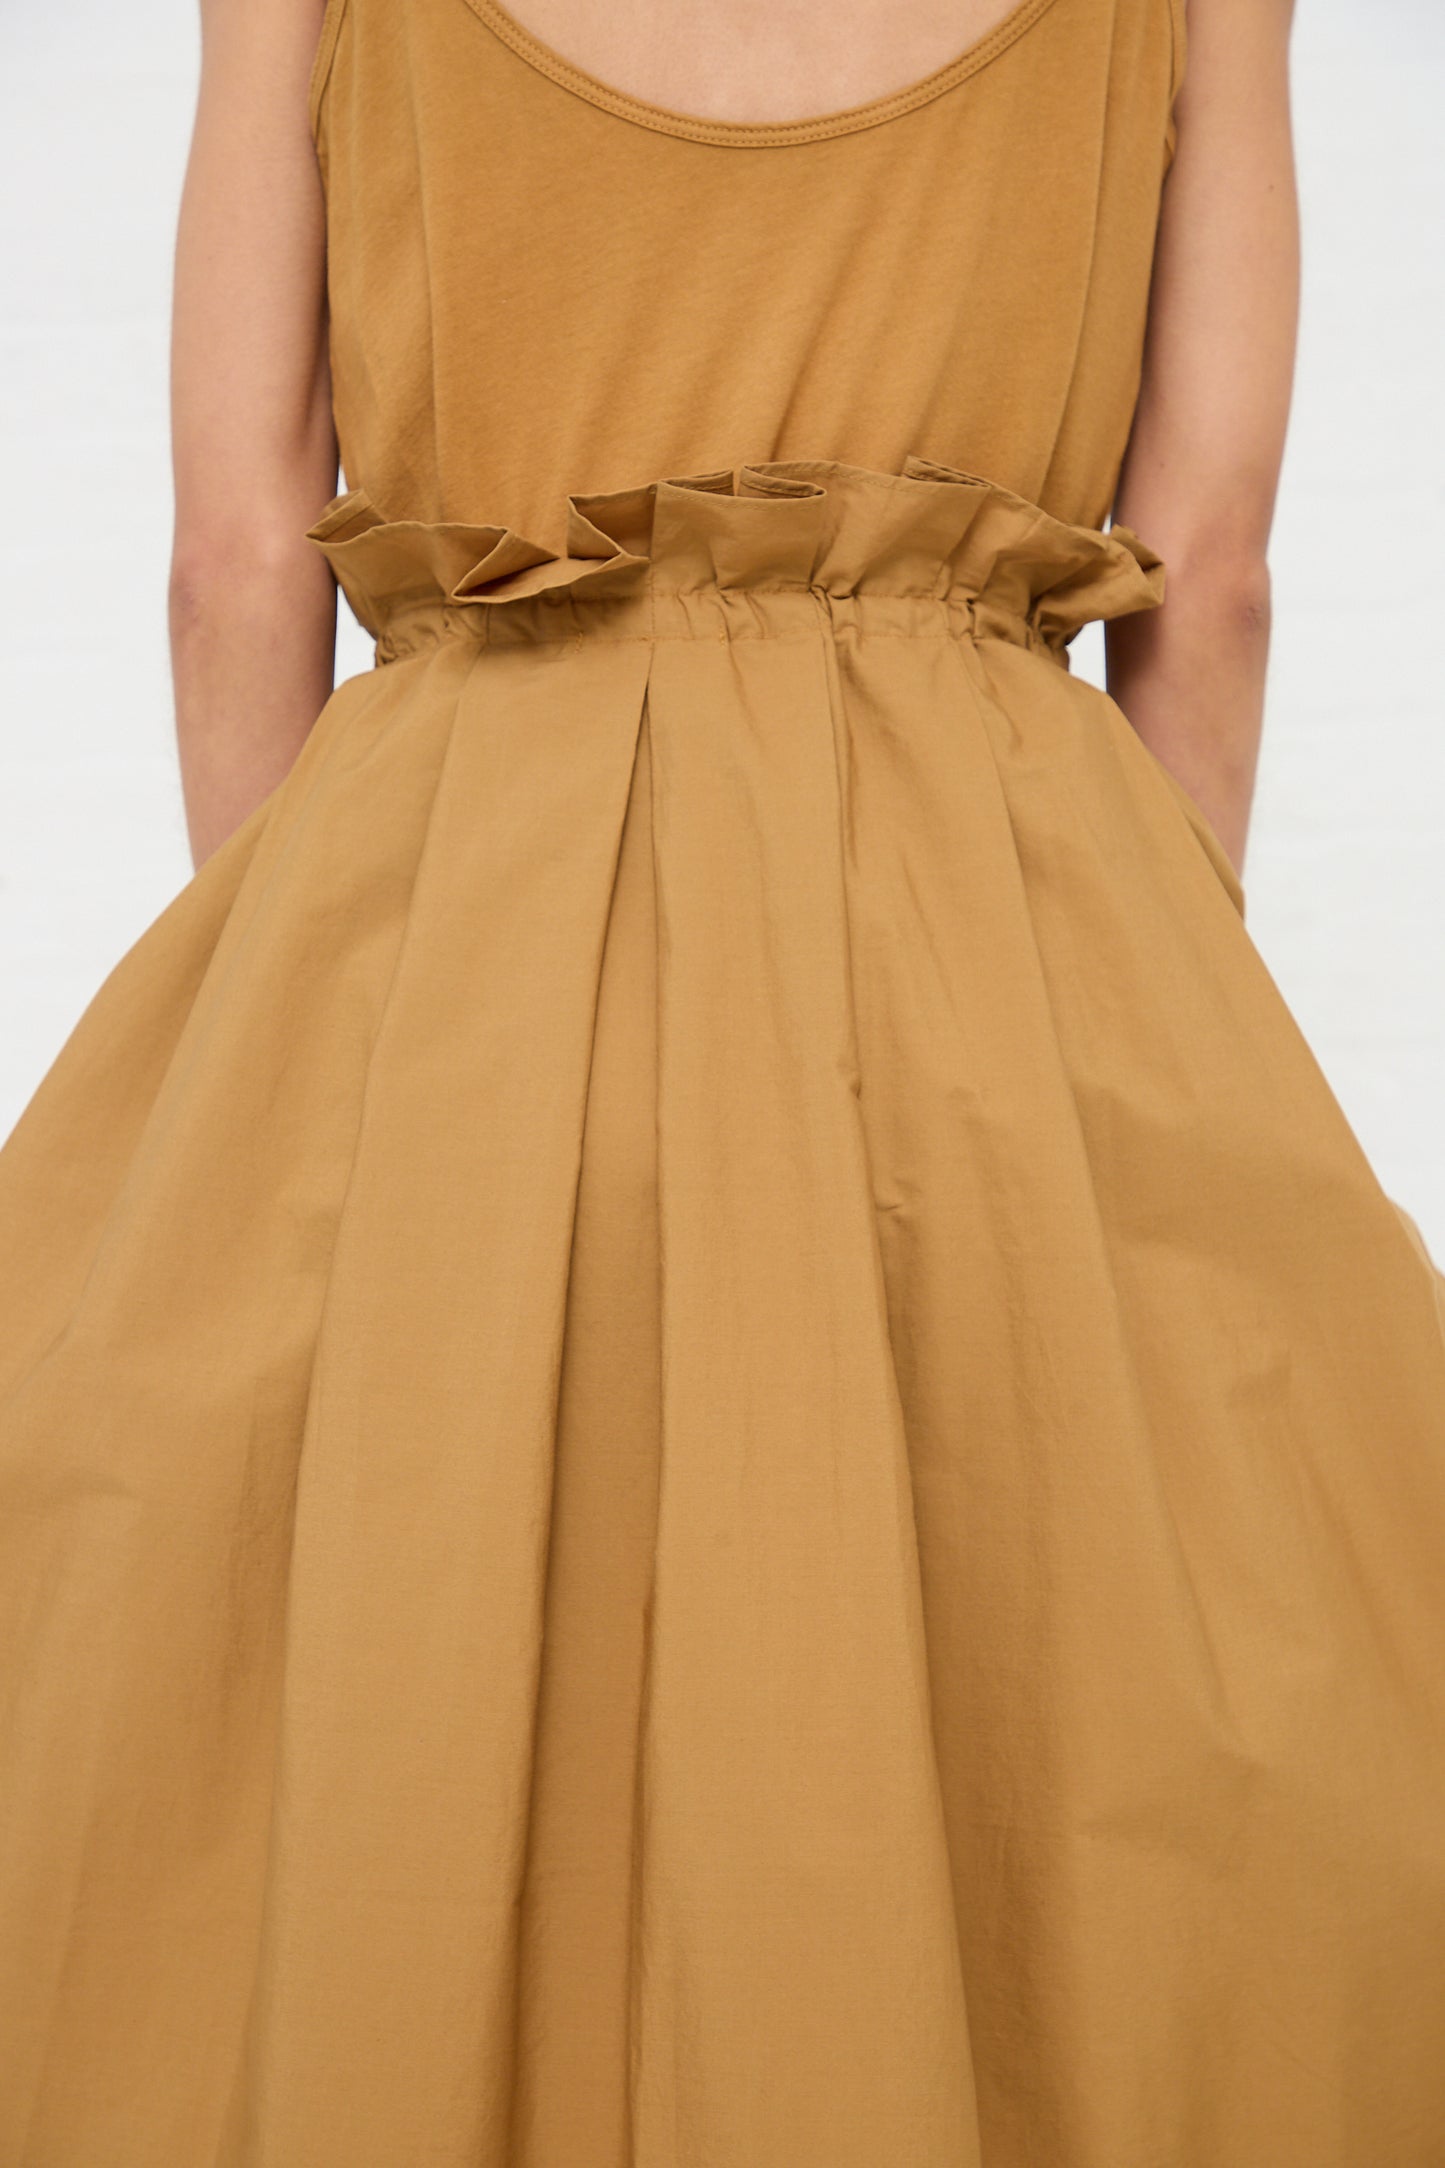 Woman wearing a tan dress with a Black Crane Cotton Parachute Skirt in Camel and a bow detail at the waist.